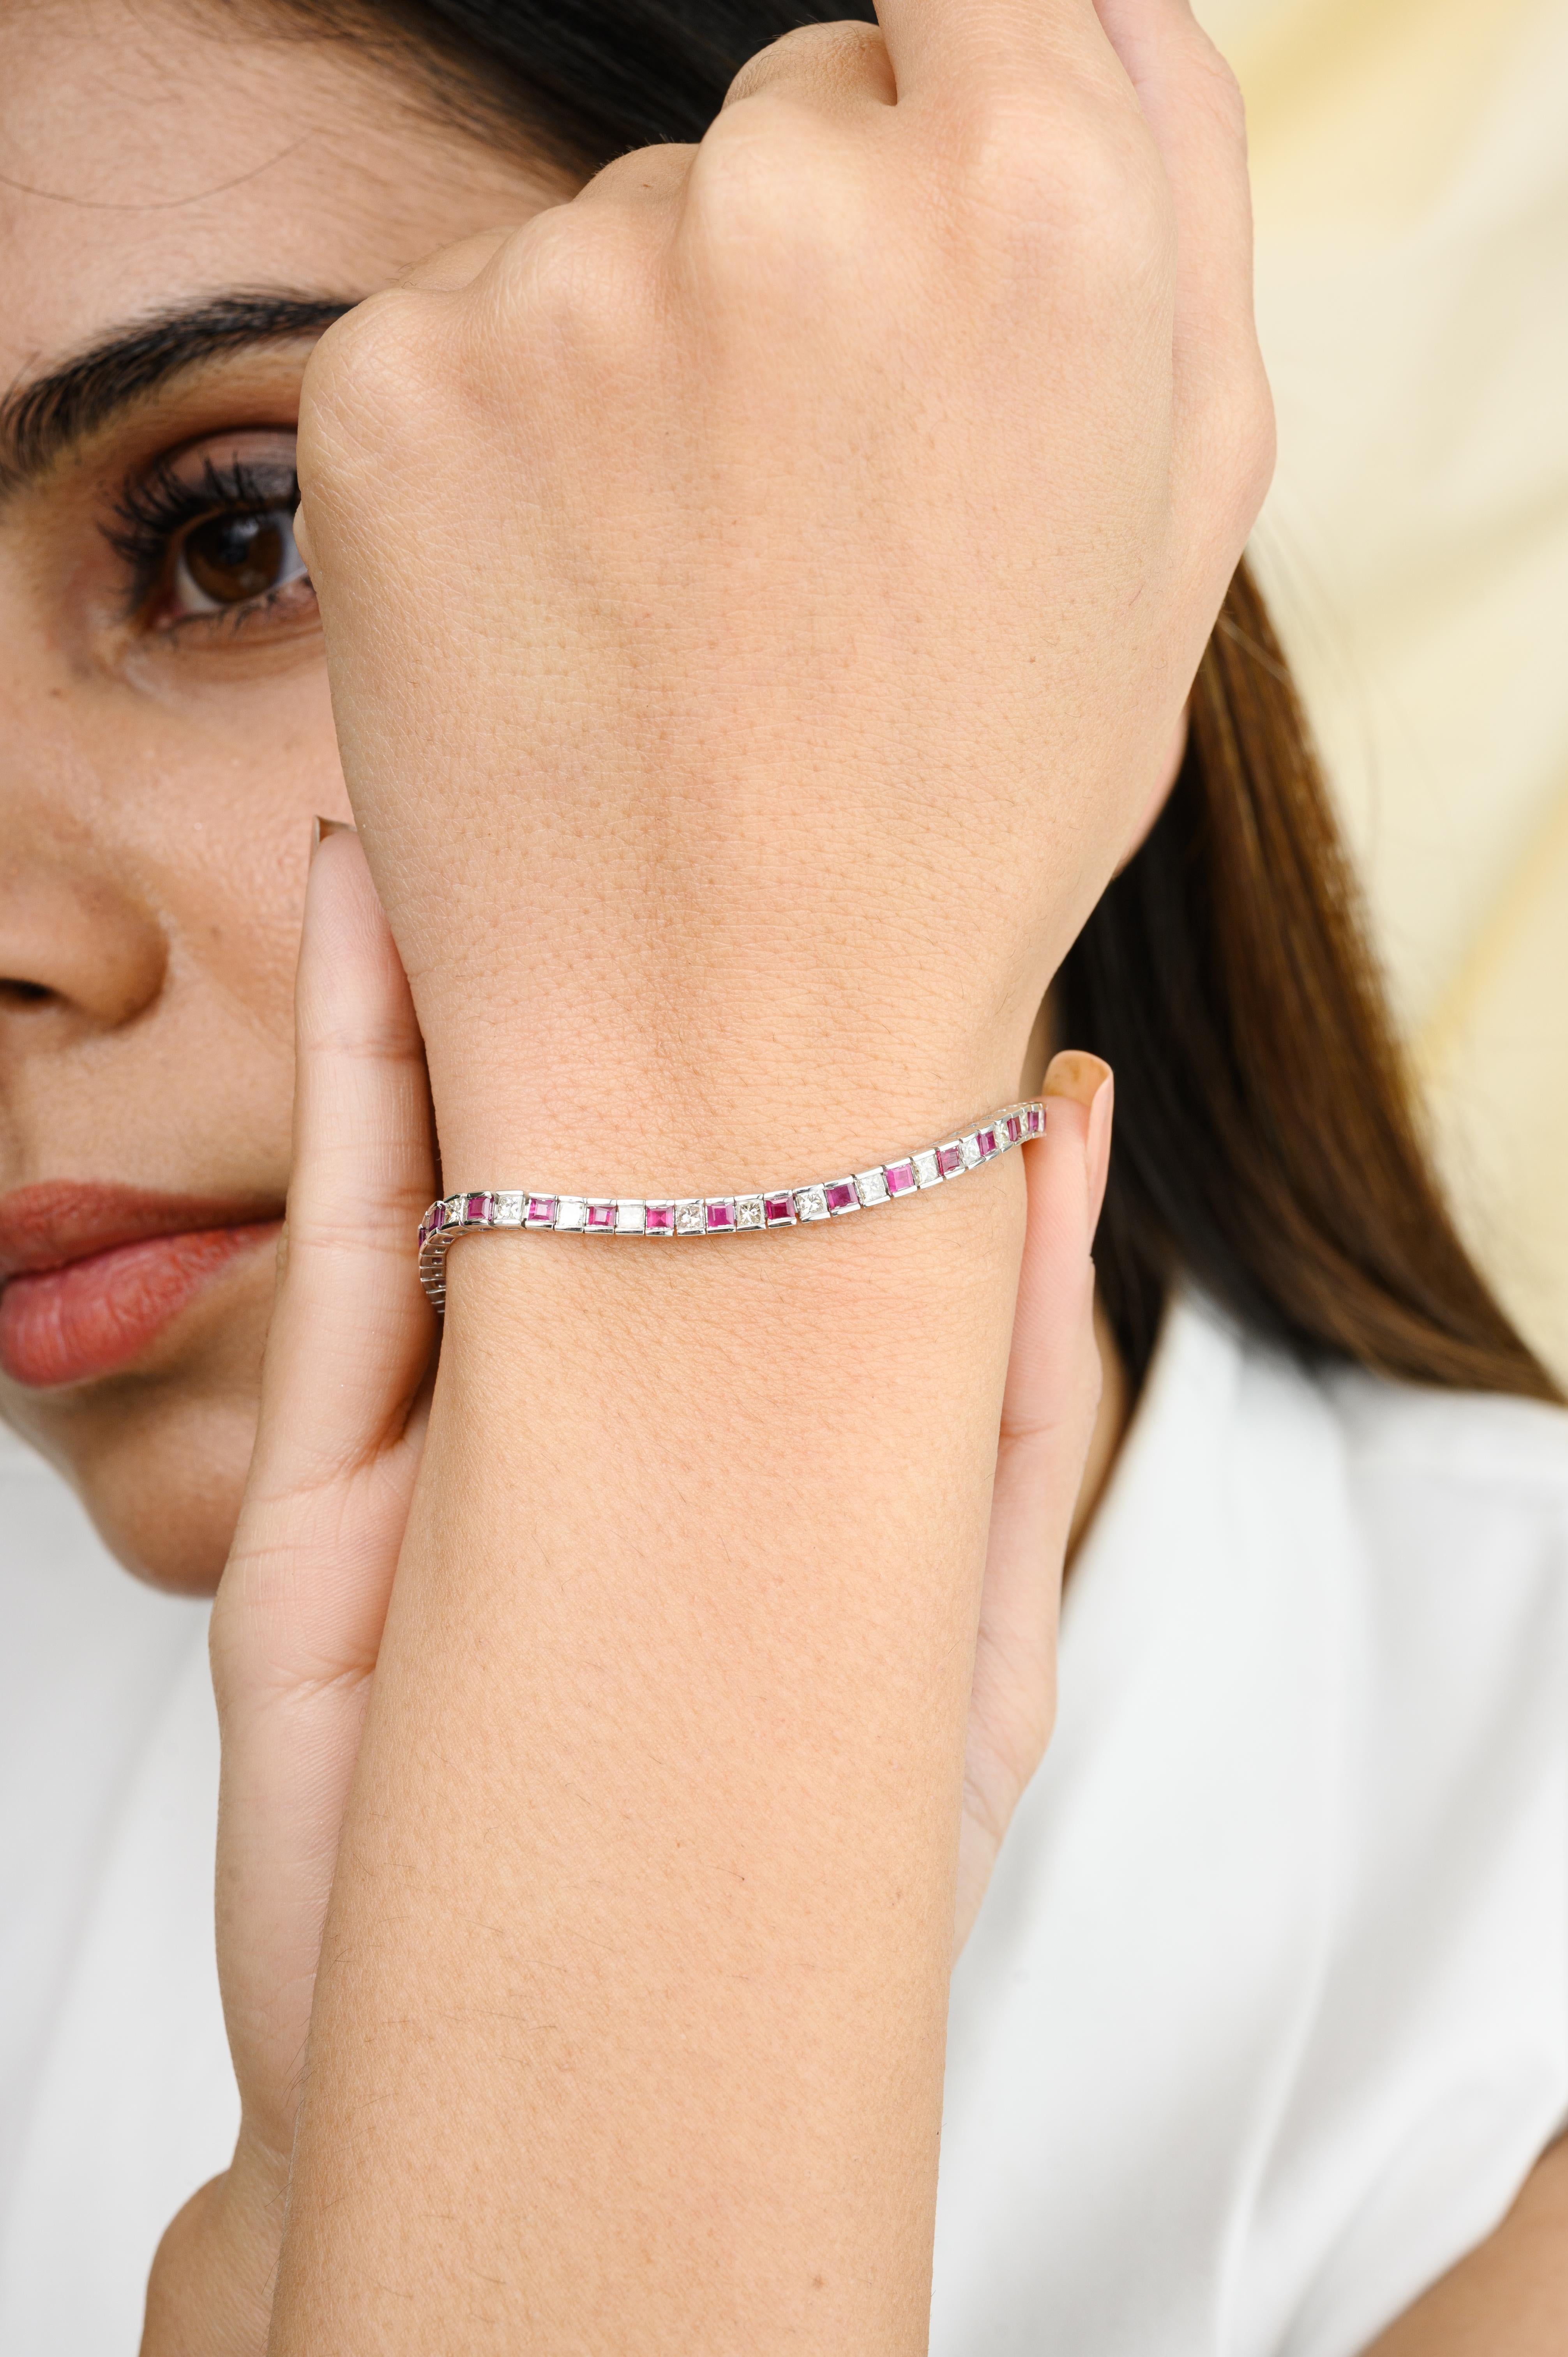 This Alternating Ruby Diamond Tennis Bracelet in 18K gold showcases 3.41 carats endlessly sparkling natural ruby and 2.28 carats of diamonds. It measures 7.5 inches long in length. 
Ruby improves mental strength. 
Designed with perfect square cut